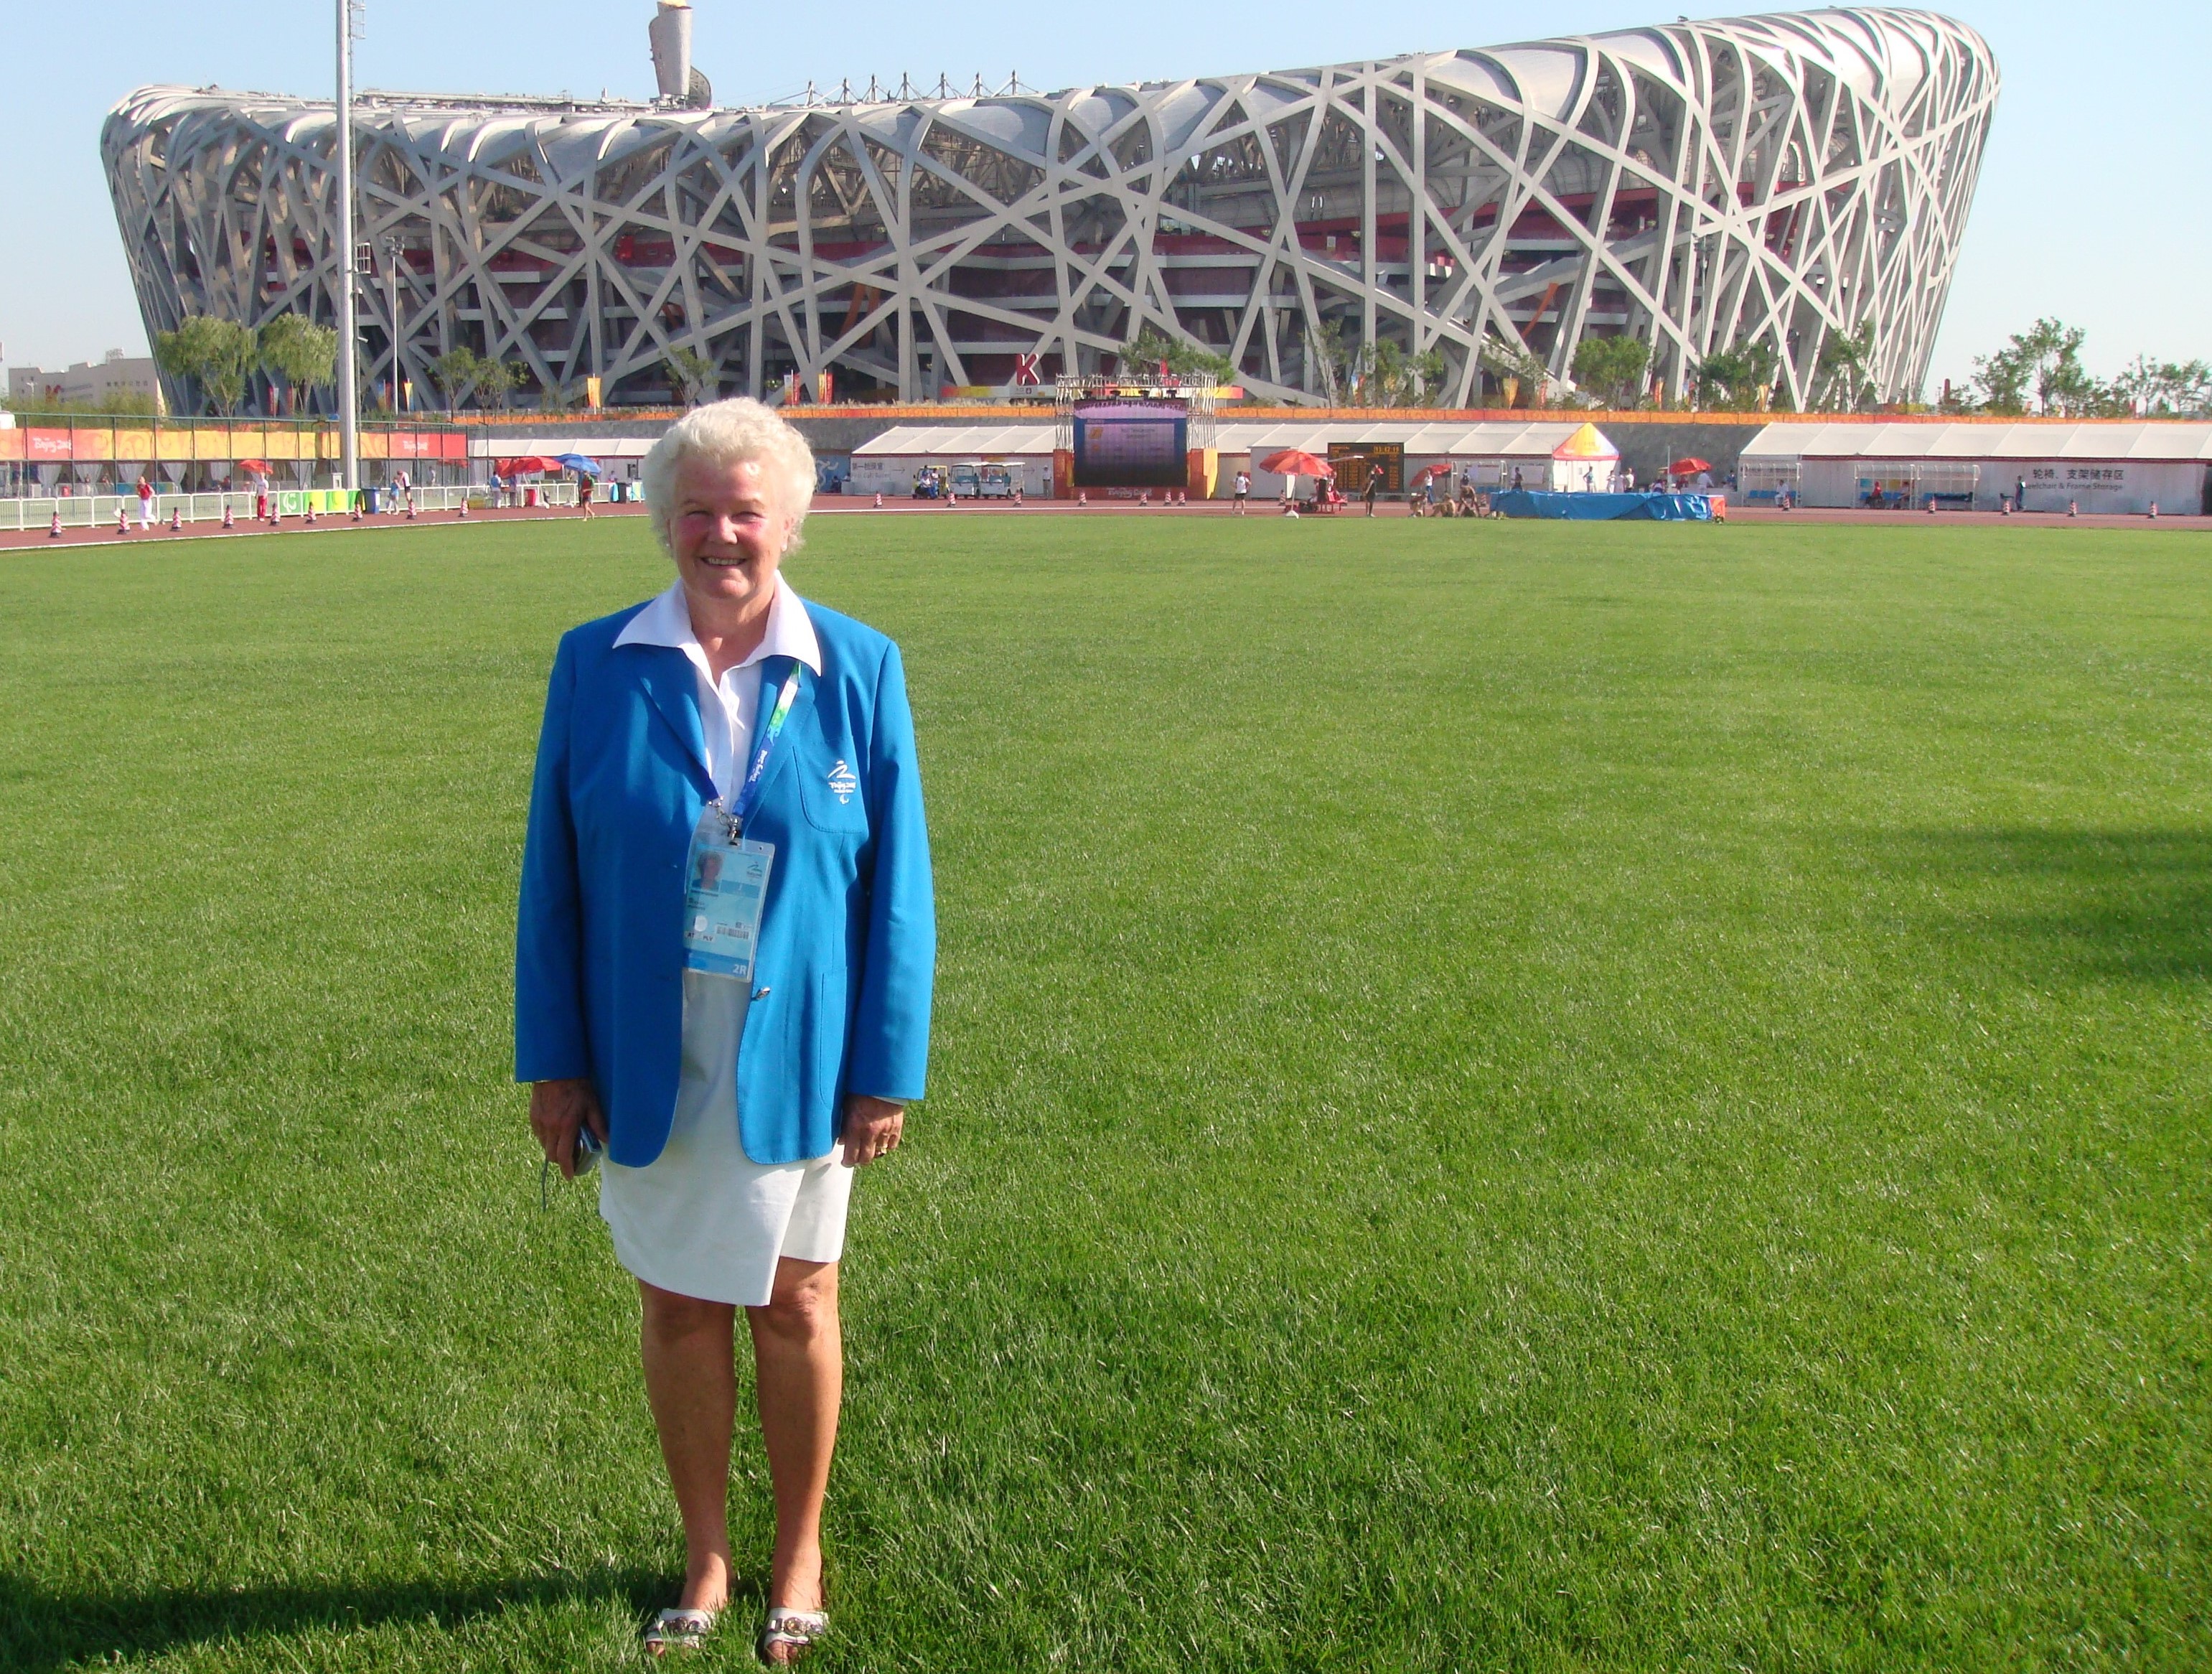 A woman in white skirt and blue jacket posing in front of the athletics stadium during the Beijing 2008 Paralympics